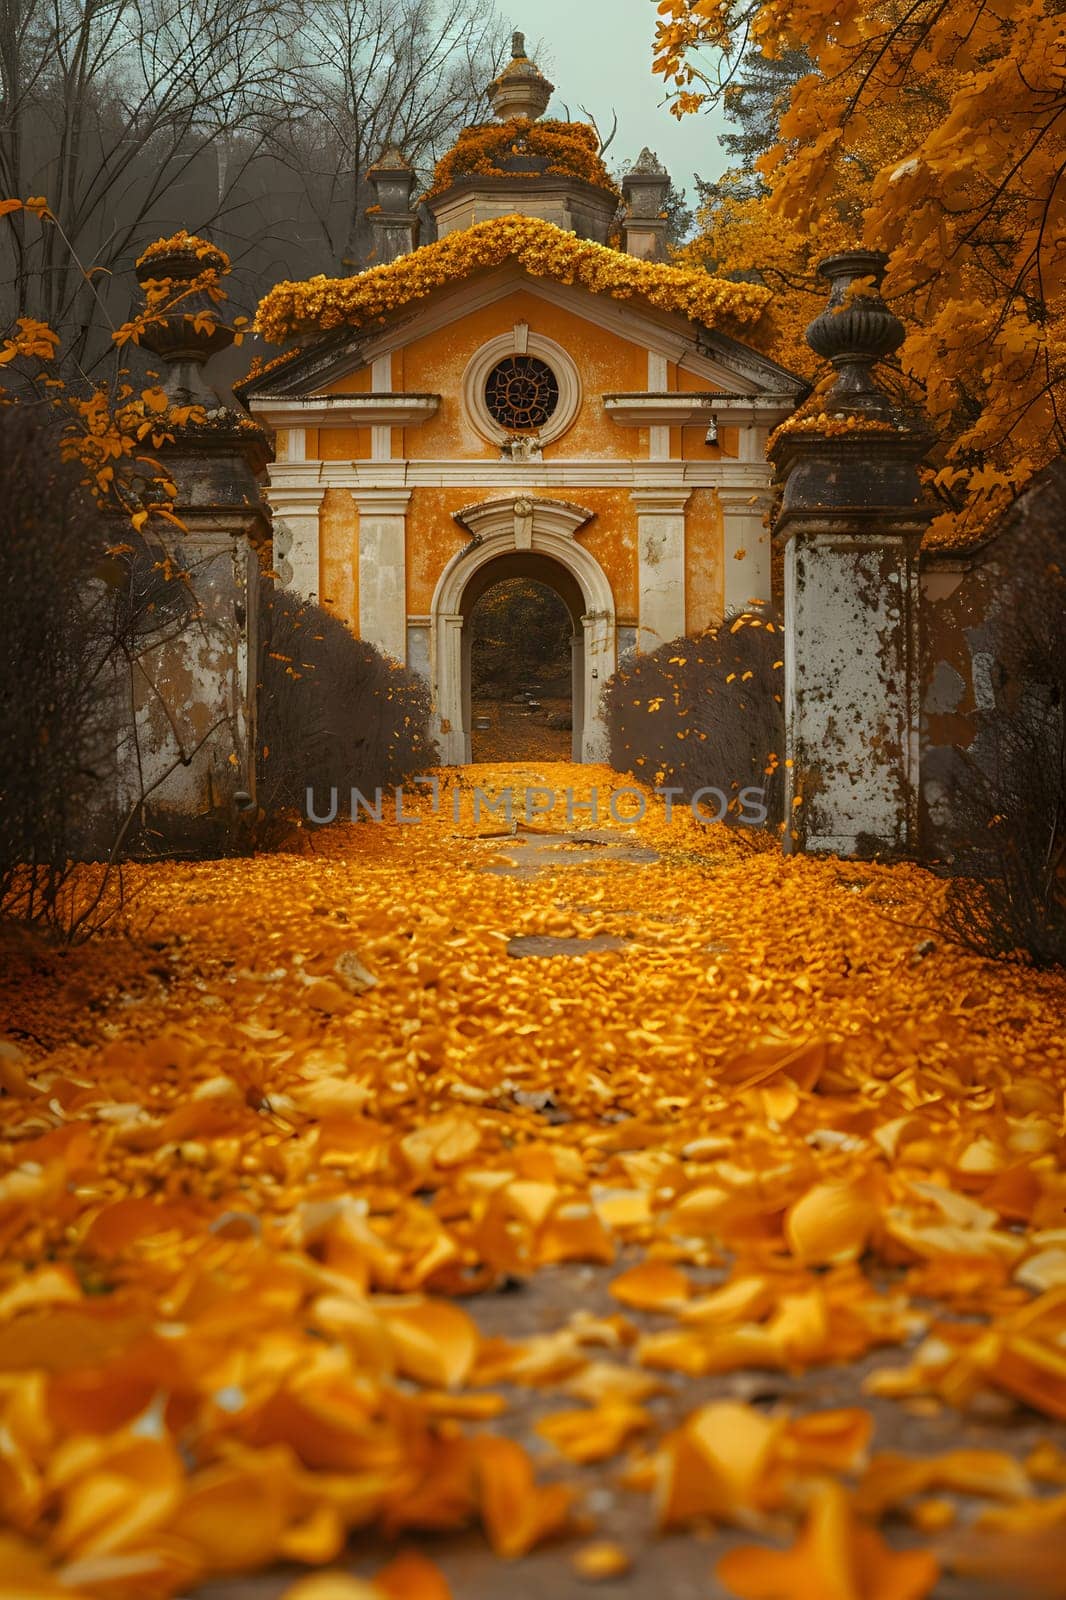 A building surrounded by fallen leaves in a natural landscape by Nadtochiy